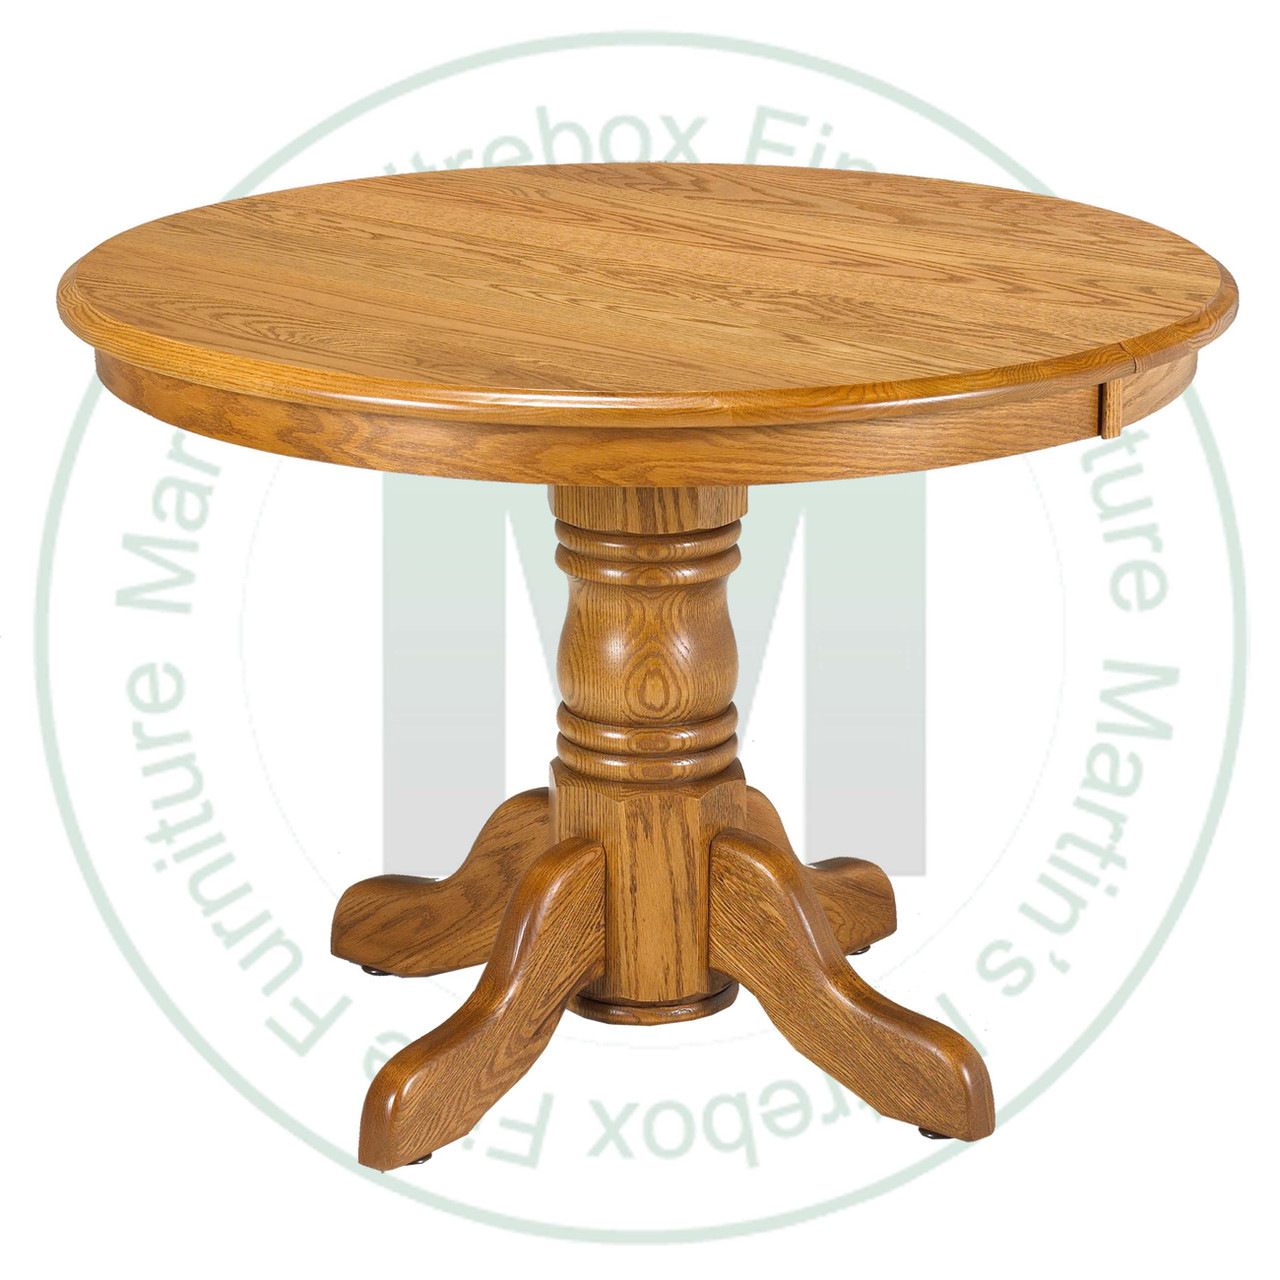 Maple Lancaster Collection Single Pedestal Table 36''D x 54''W x 30''H  Round Solid Table. Table Has 1.25'' Thick Top